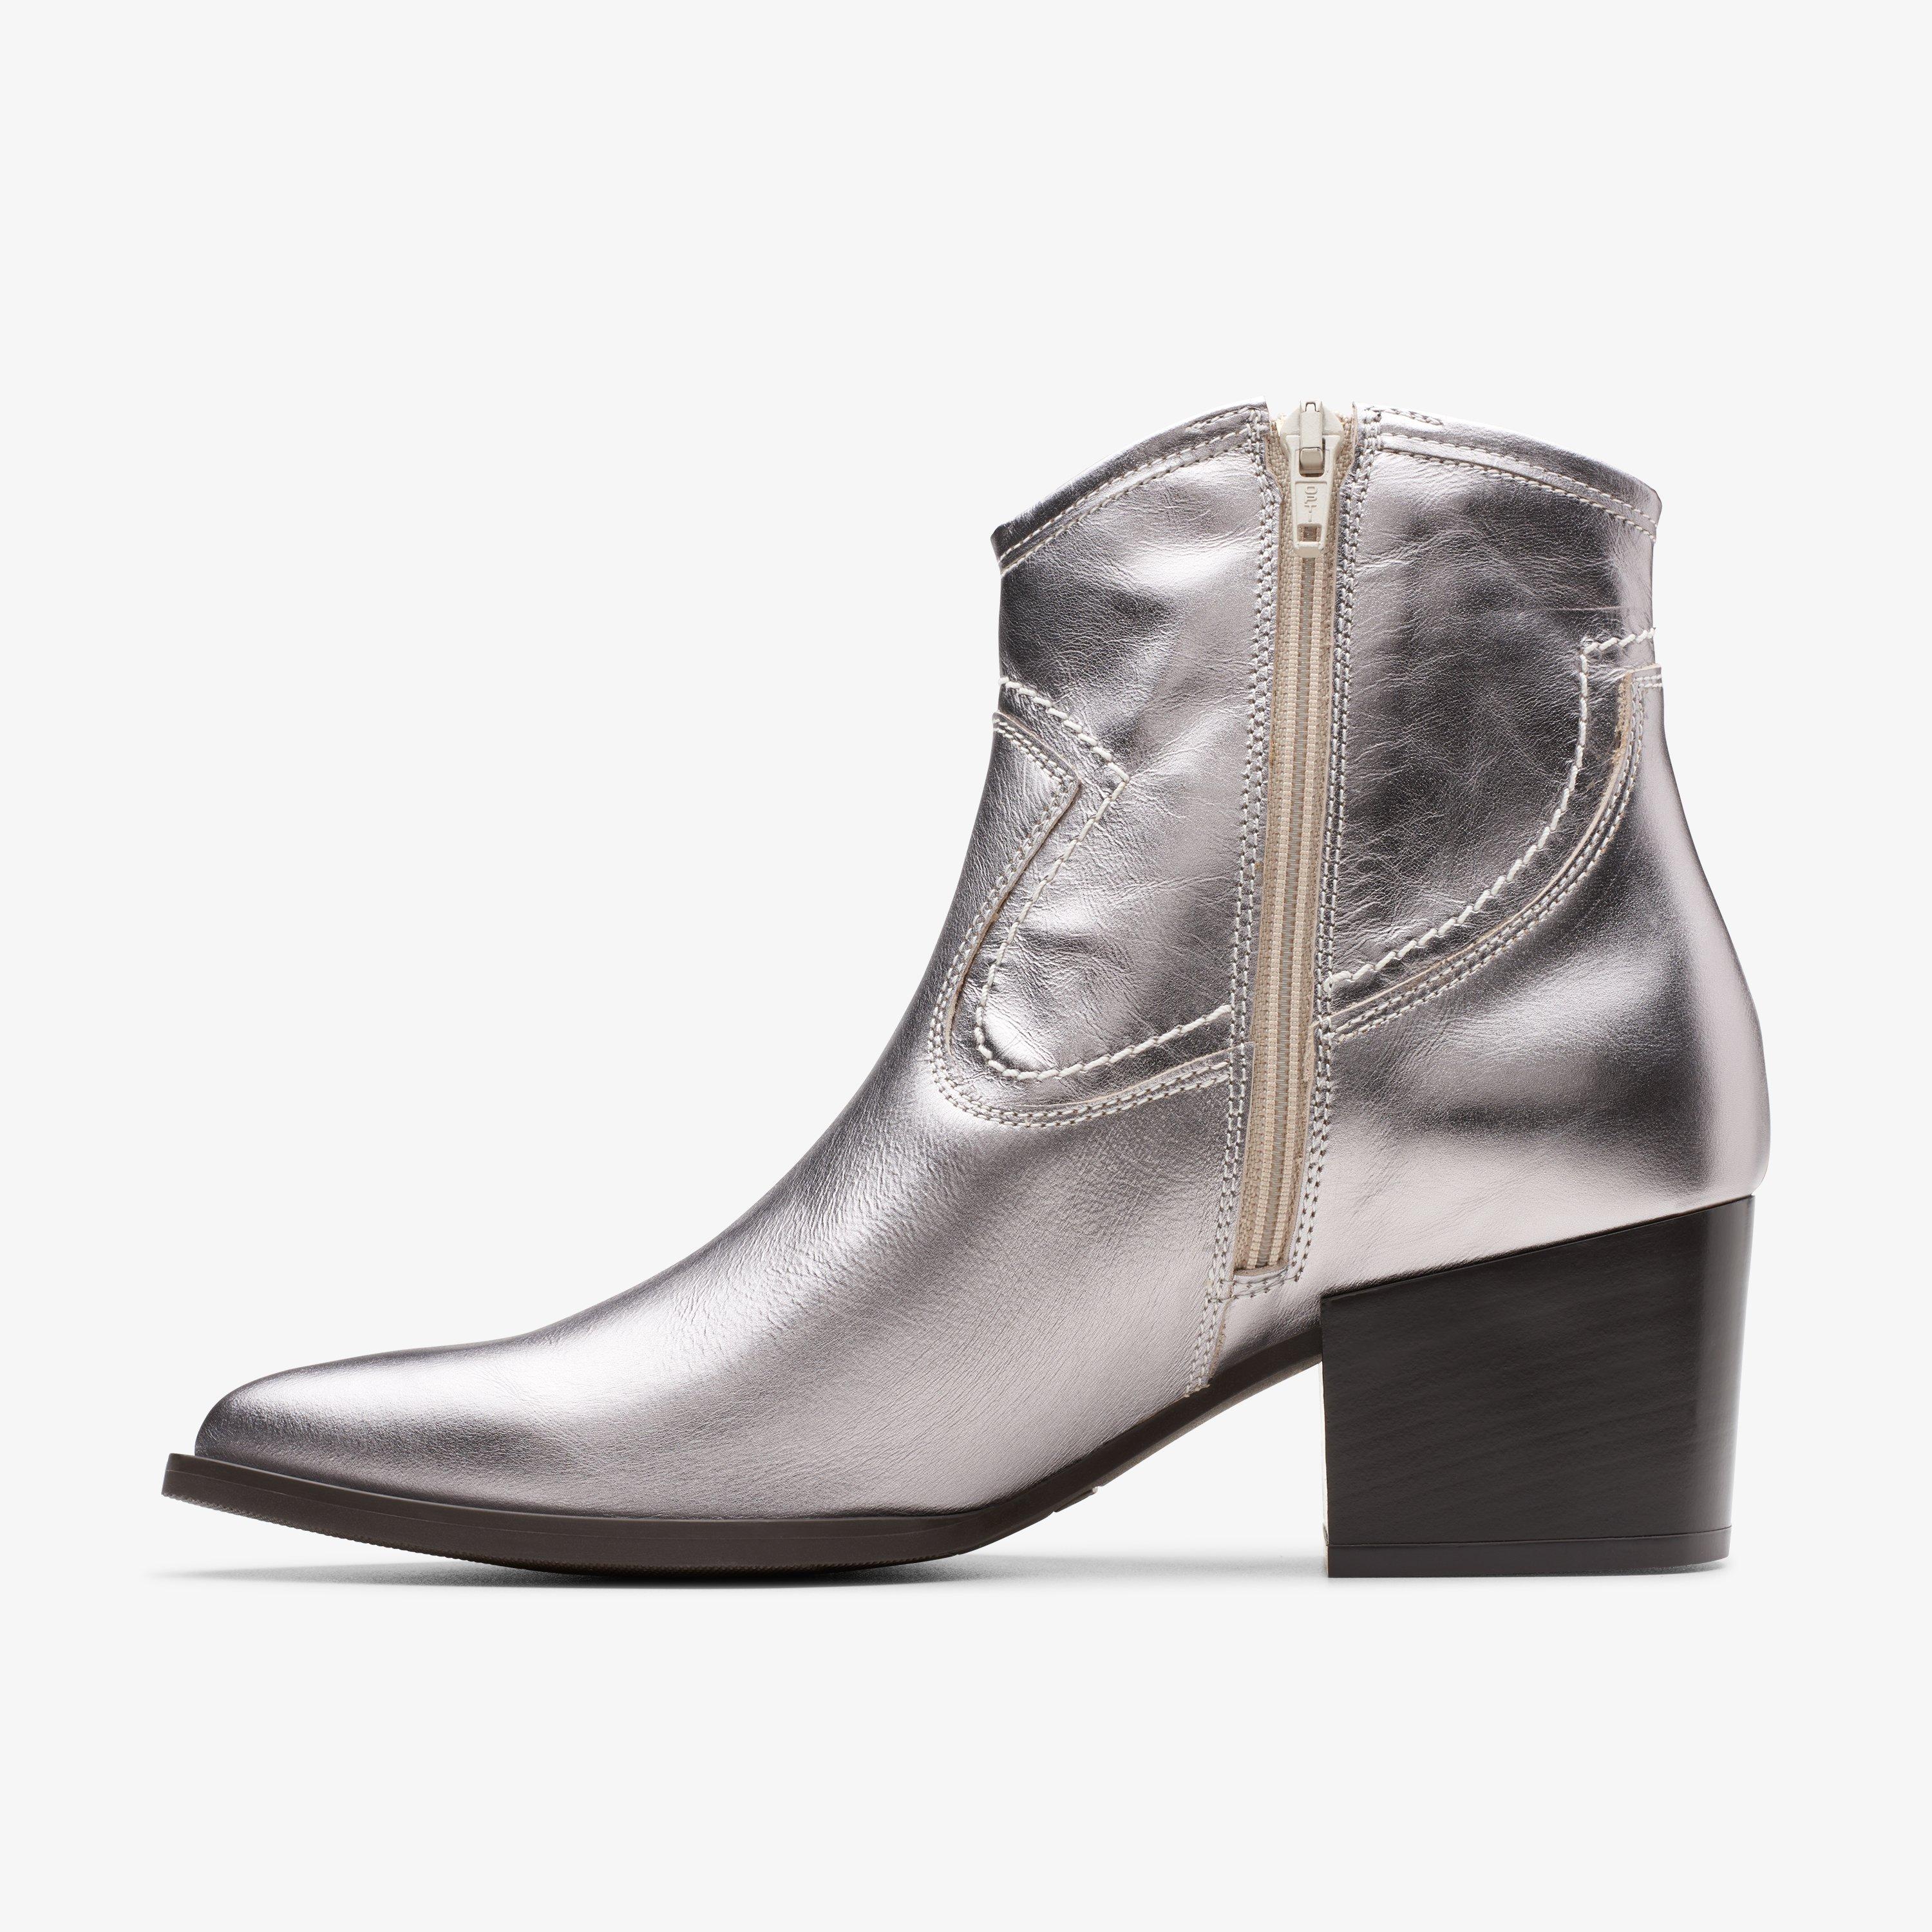 Women's Ankle Boots - Leather & Heeled Ankle Boots | Clarks UK